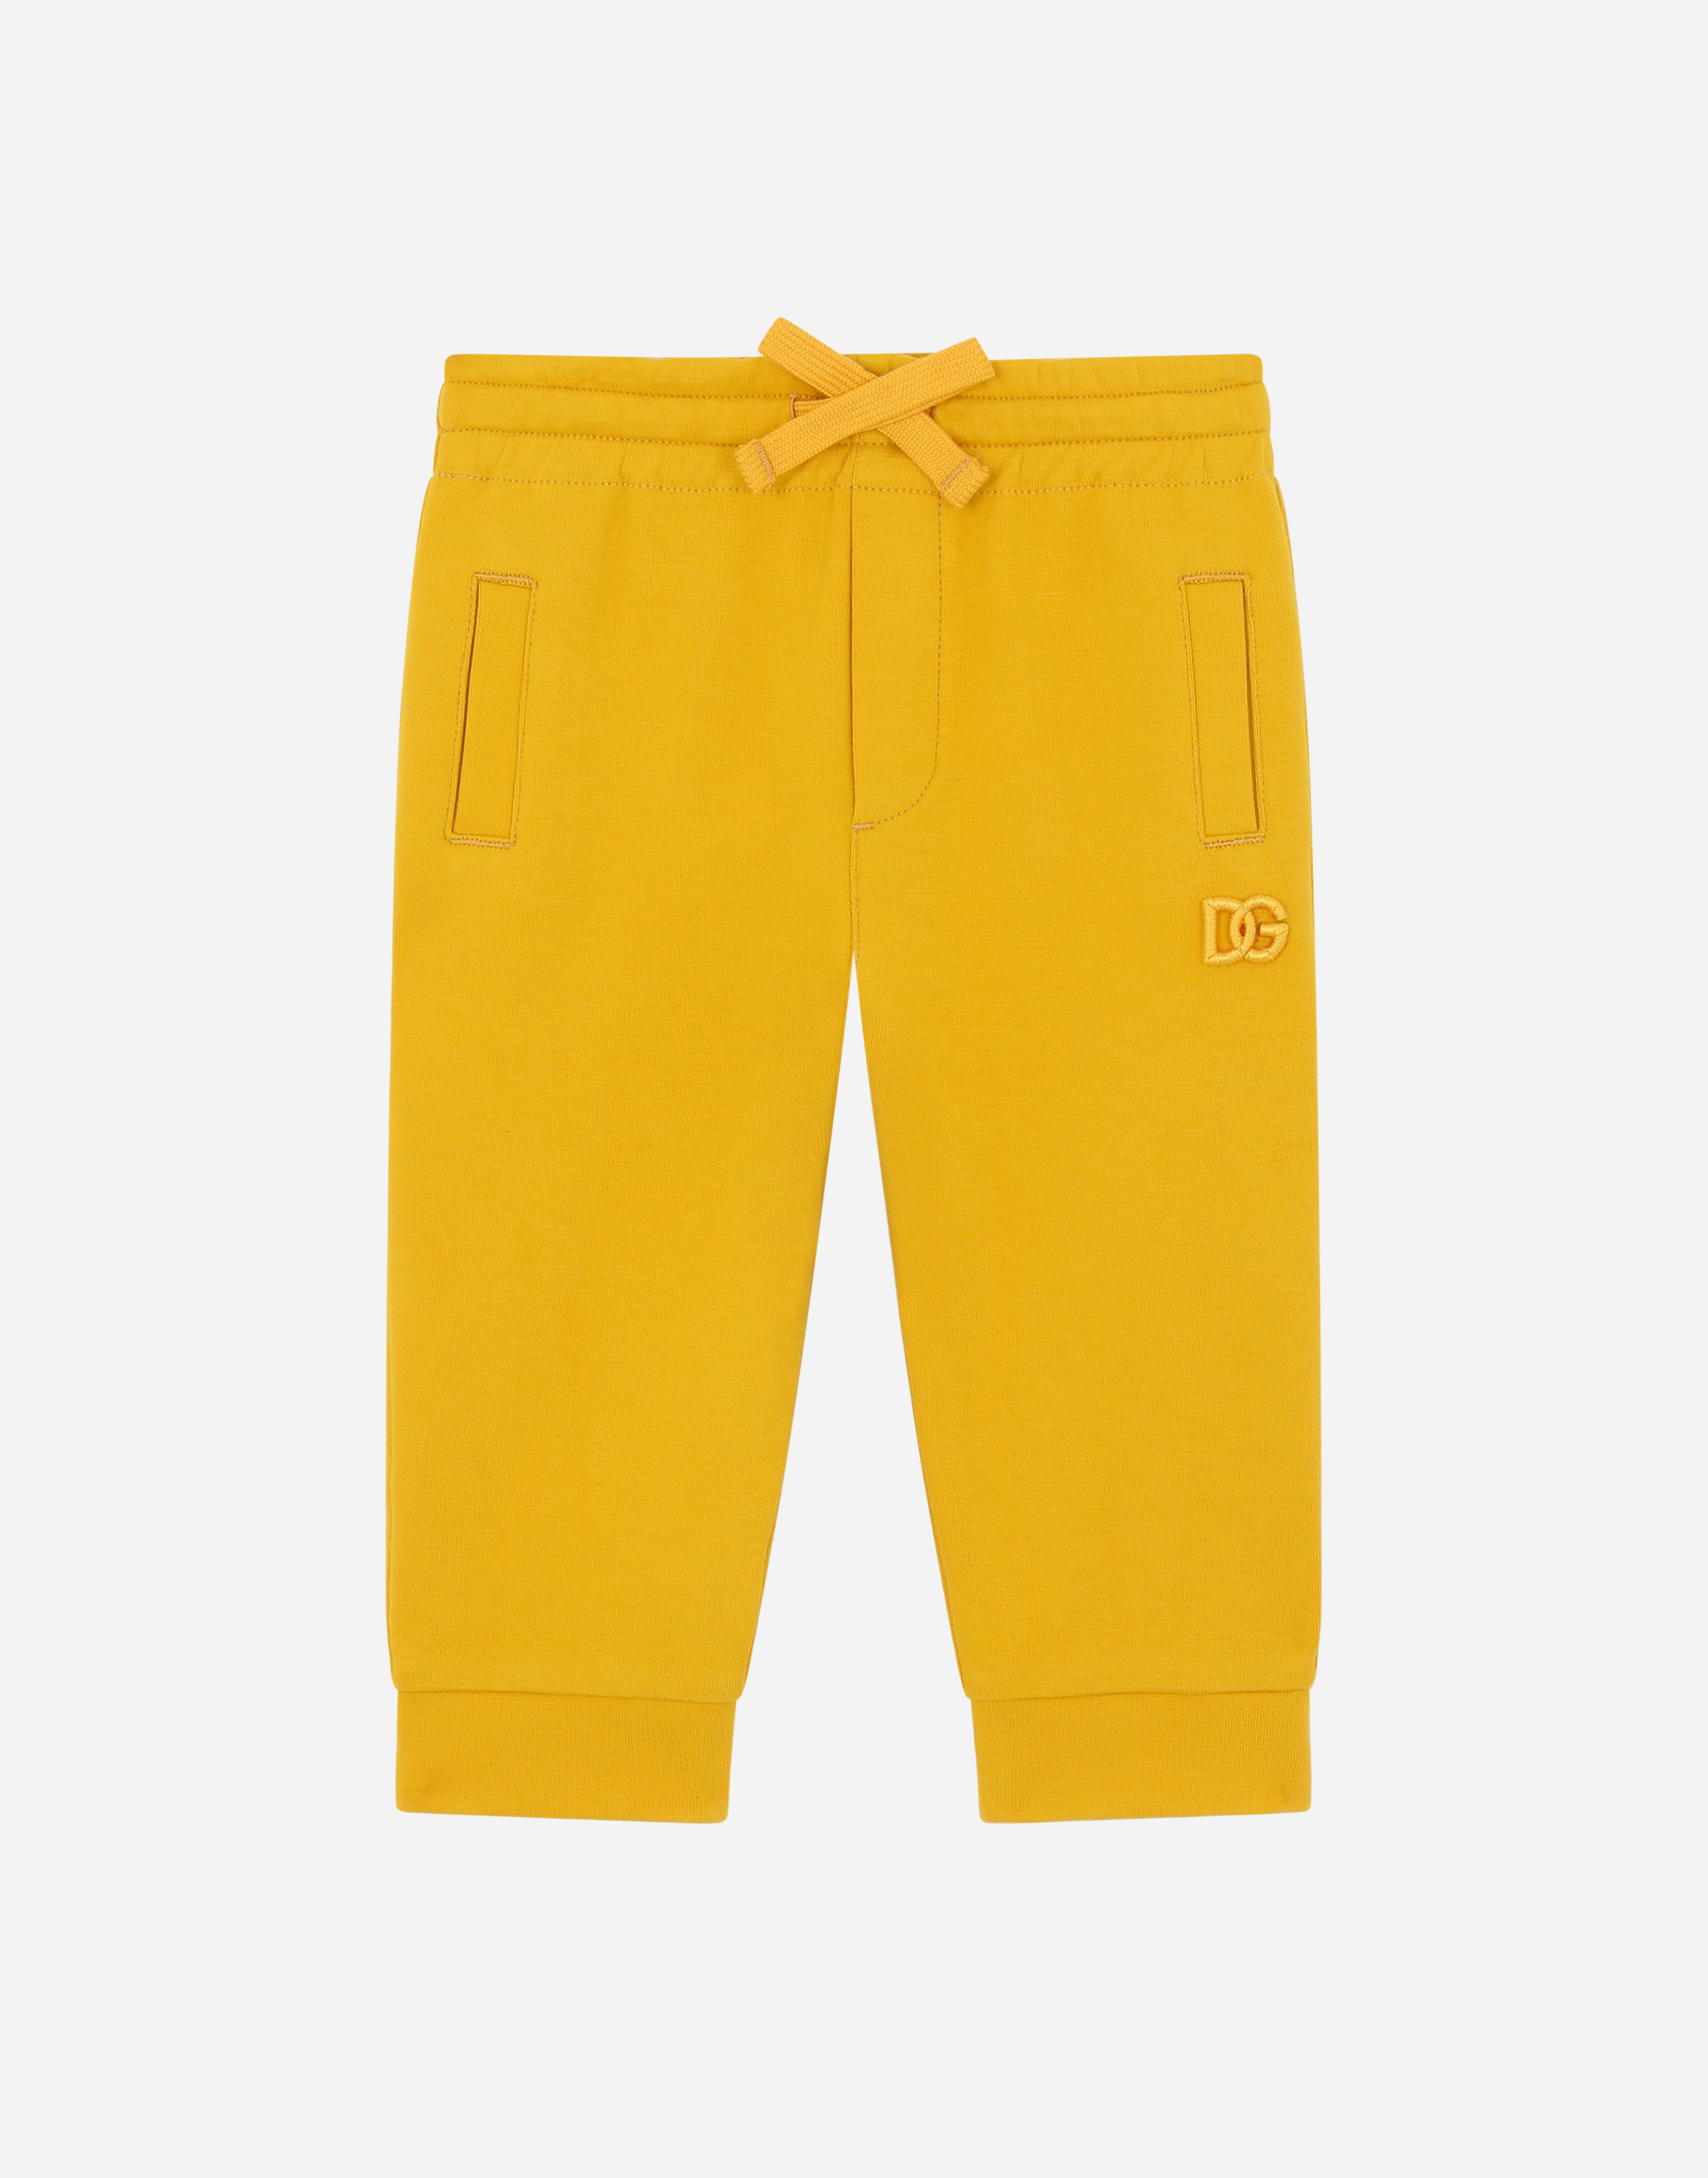 Jersey jogging pants with DG logo embroidery in Yellow